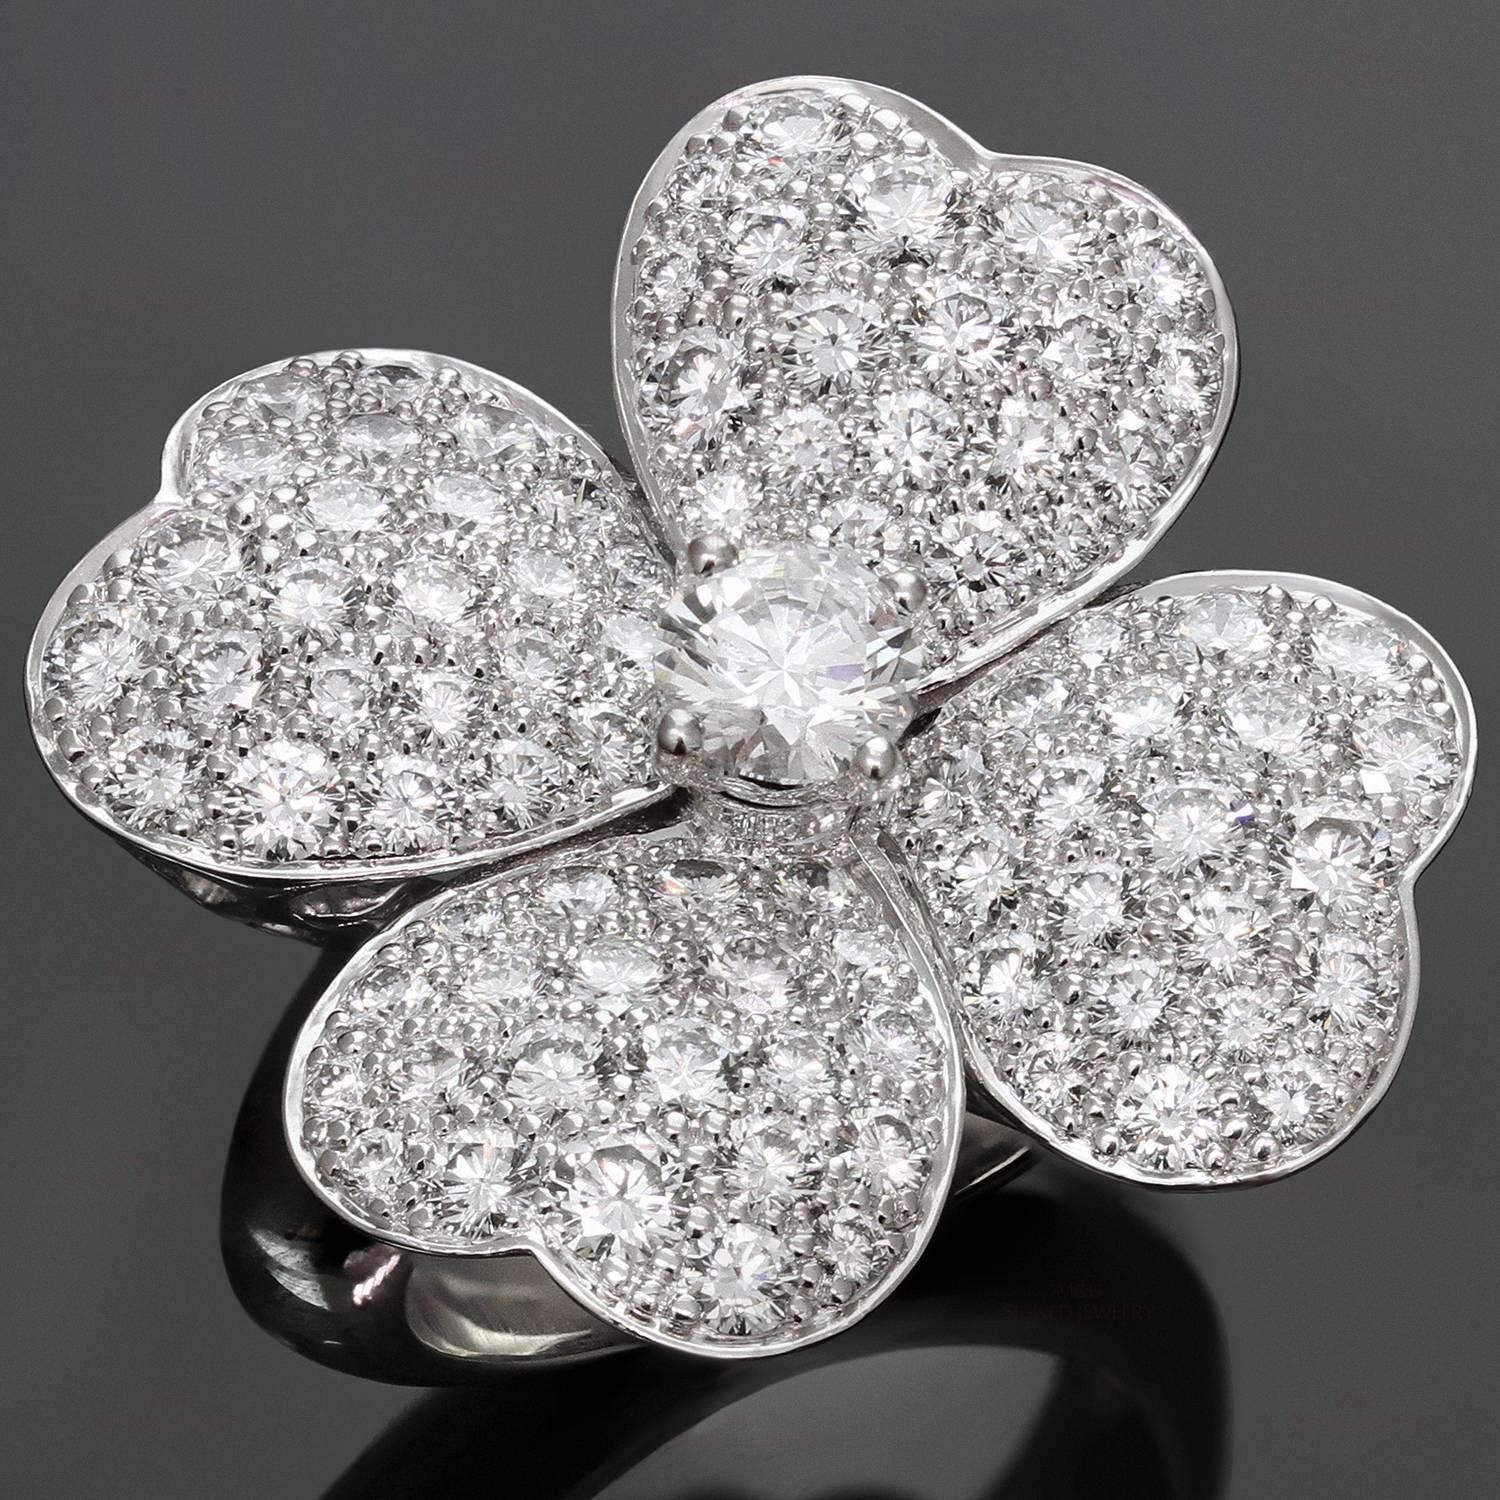 This magnificent Van Cleef & Arpels ring from the elegant Cosmos collection features a 4-petal flower motif crafted in 18k white gold and set with brilliant-cut round diamonds of an estimated 3.25 carats. This is the large model of the ring made in